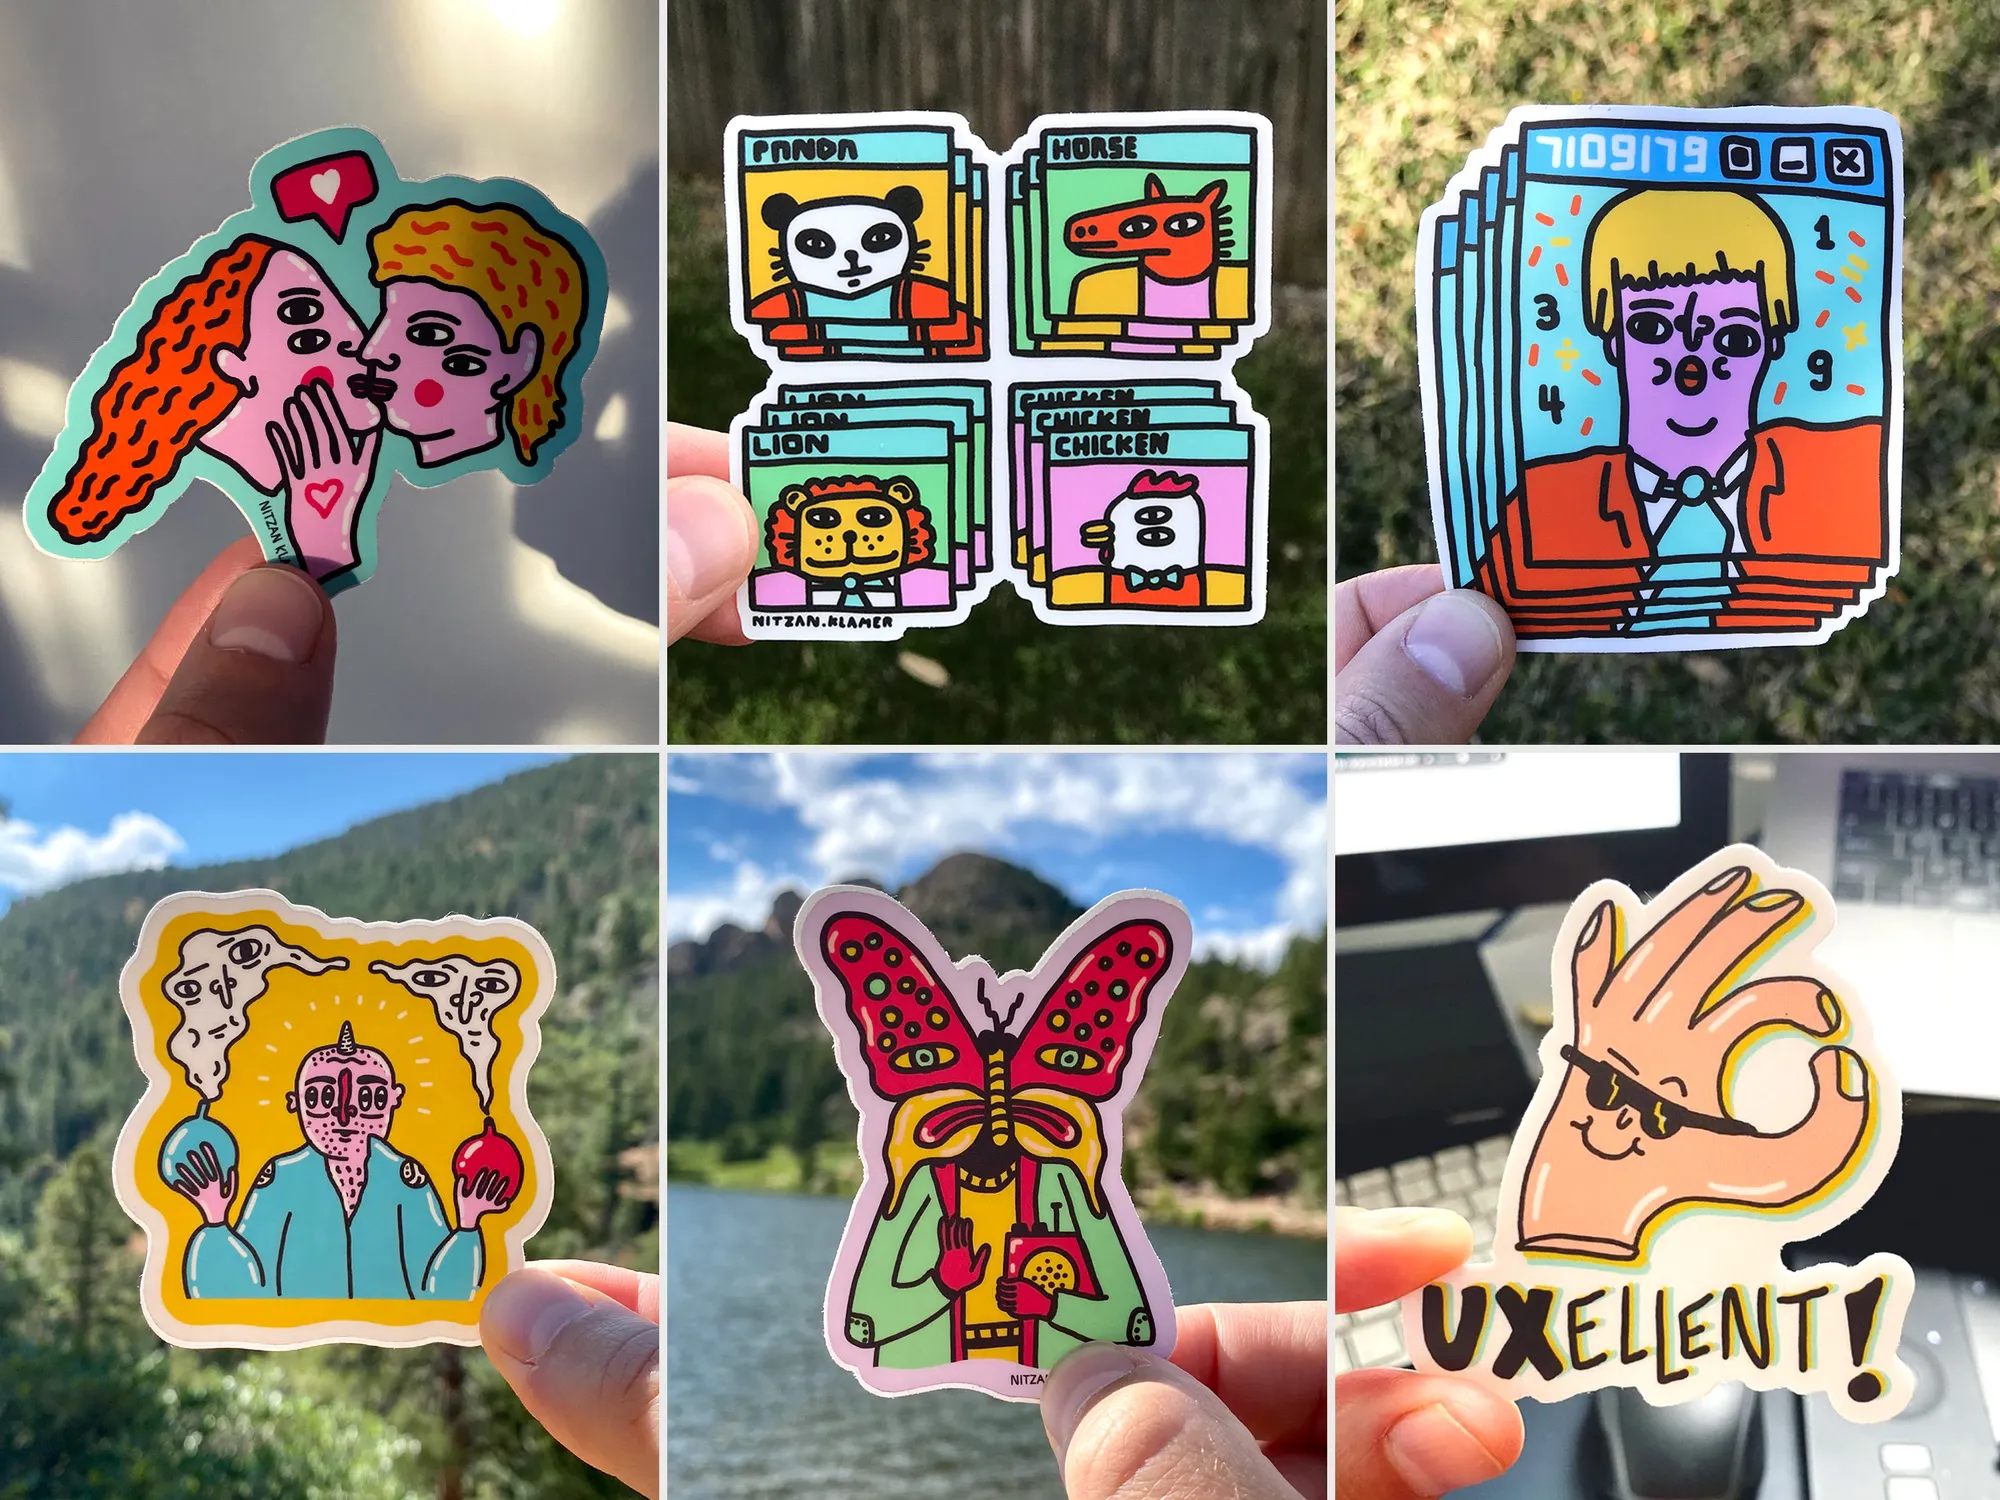 A six-frame photographic composite of sticker art. Clockwise from top left: 1. two people kissing 2. panda, horse, chicken, lion 3. a person in a tie and blazer 4. a hand giving the OK sign and the caption UXellent! 5. a person with a butterfly head 6. a person with four eyes and holding a balloon in each hand.
